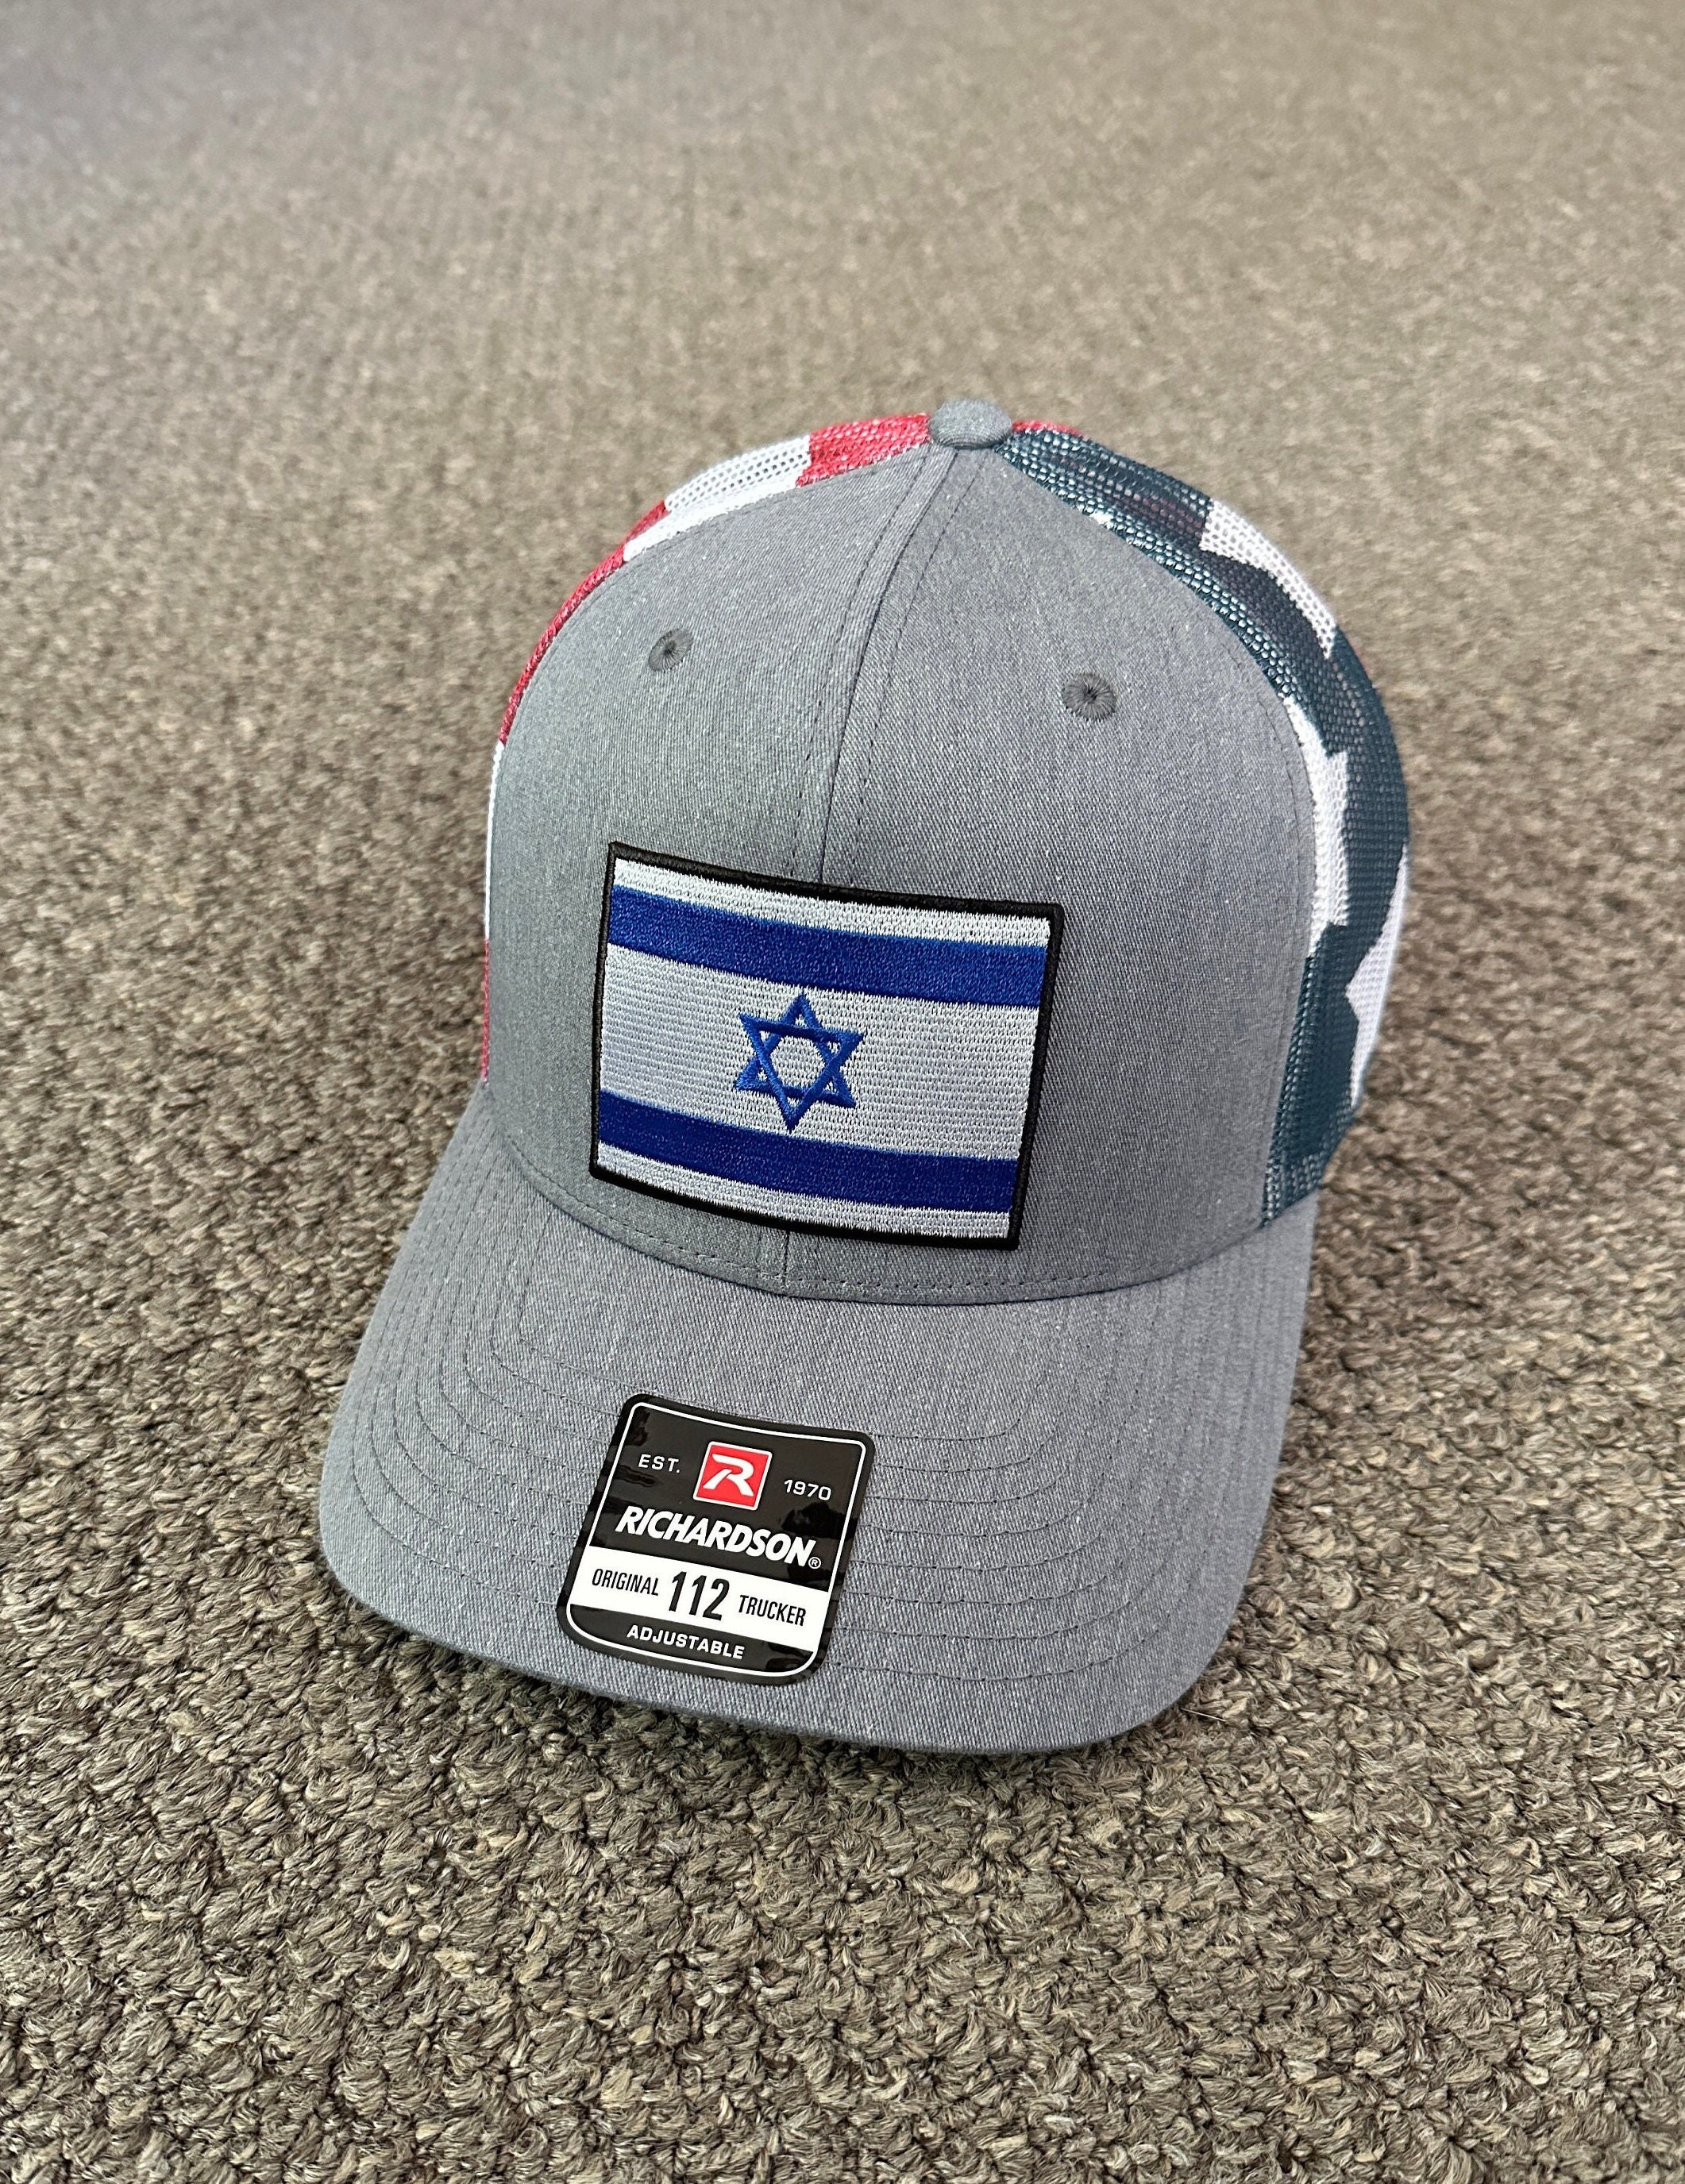 NEW SHALOM ISRAEL TOURS EMBROIDERED SOUVENIR ADJUSTABLE HATS & VISORS  LOT OF 4